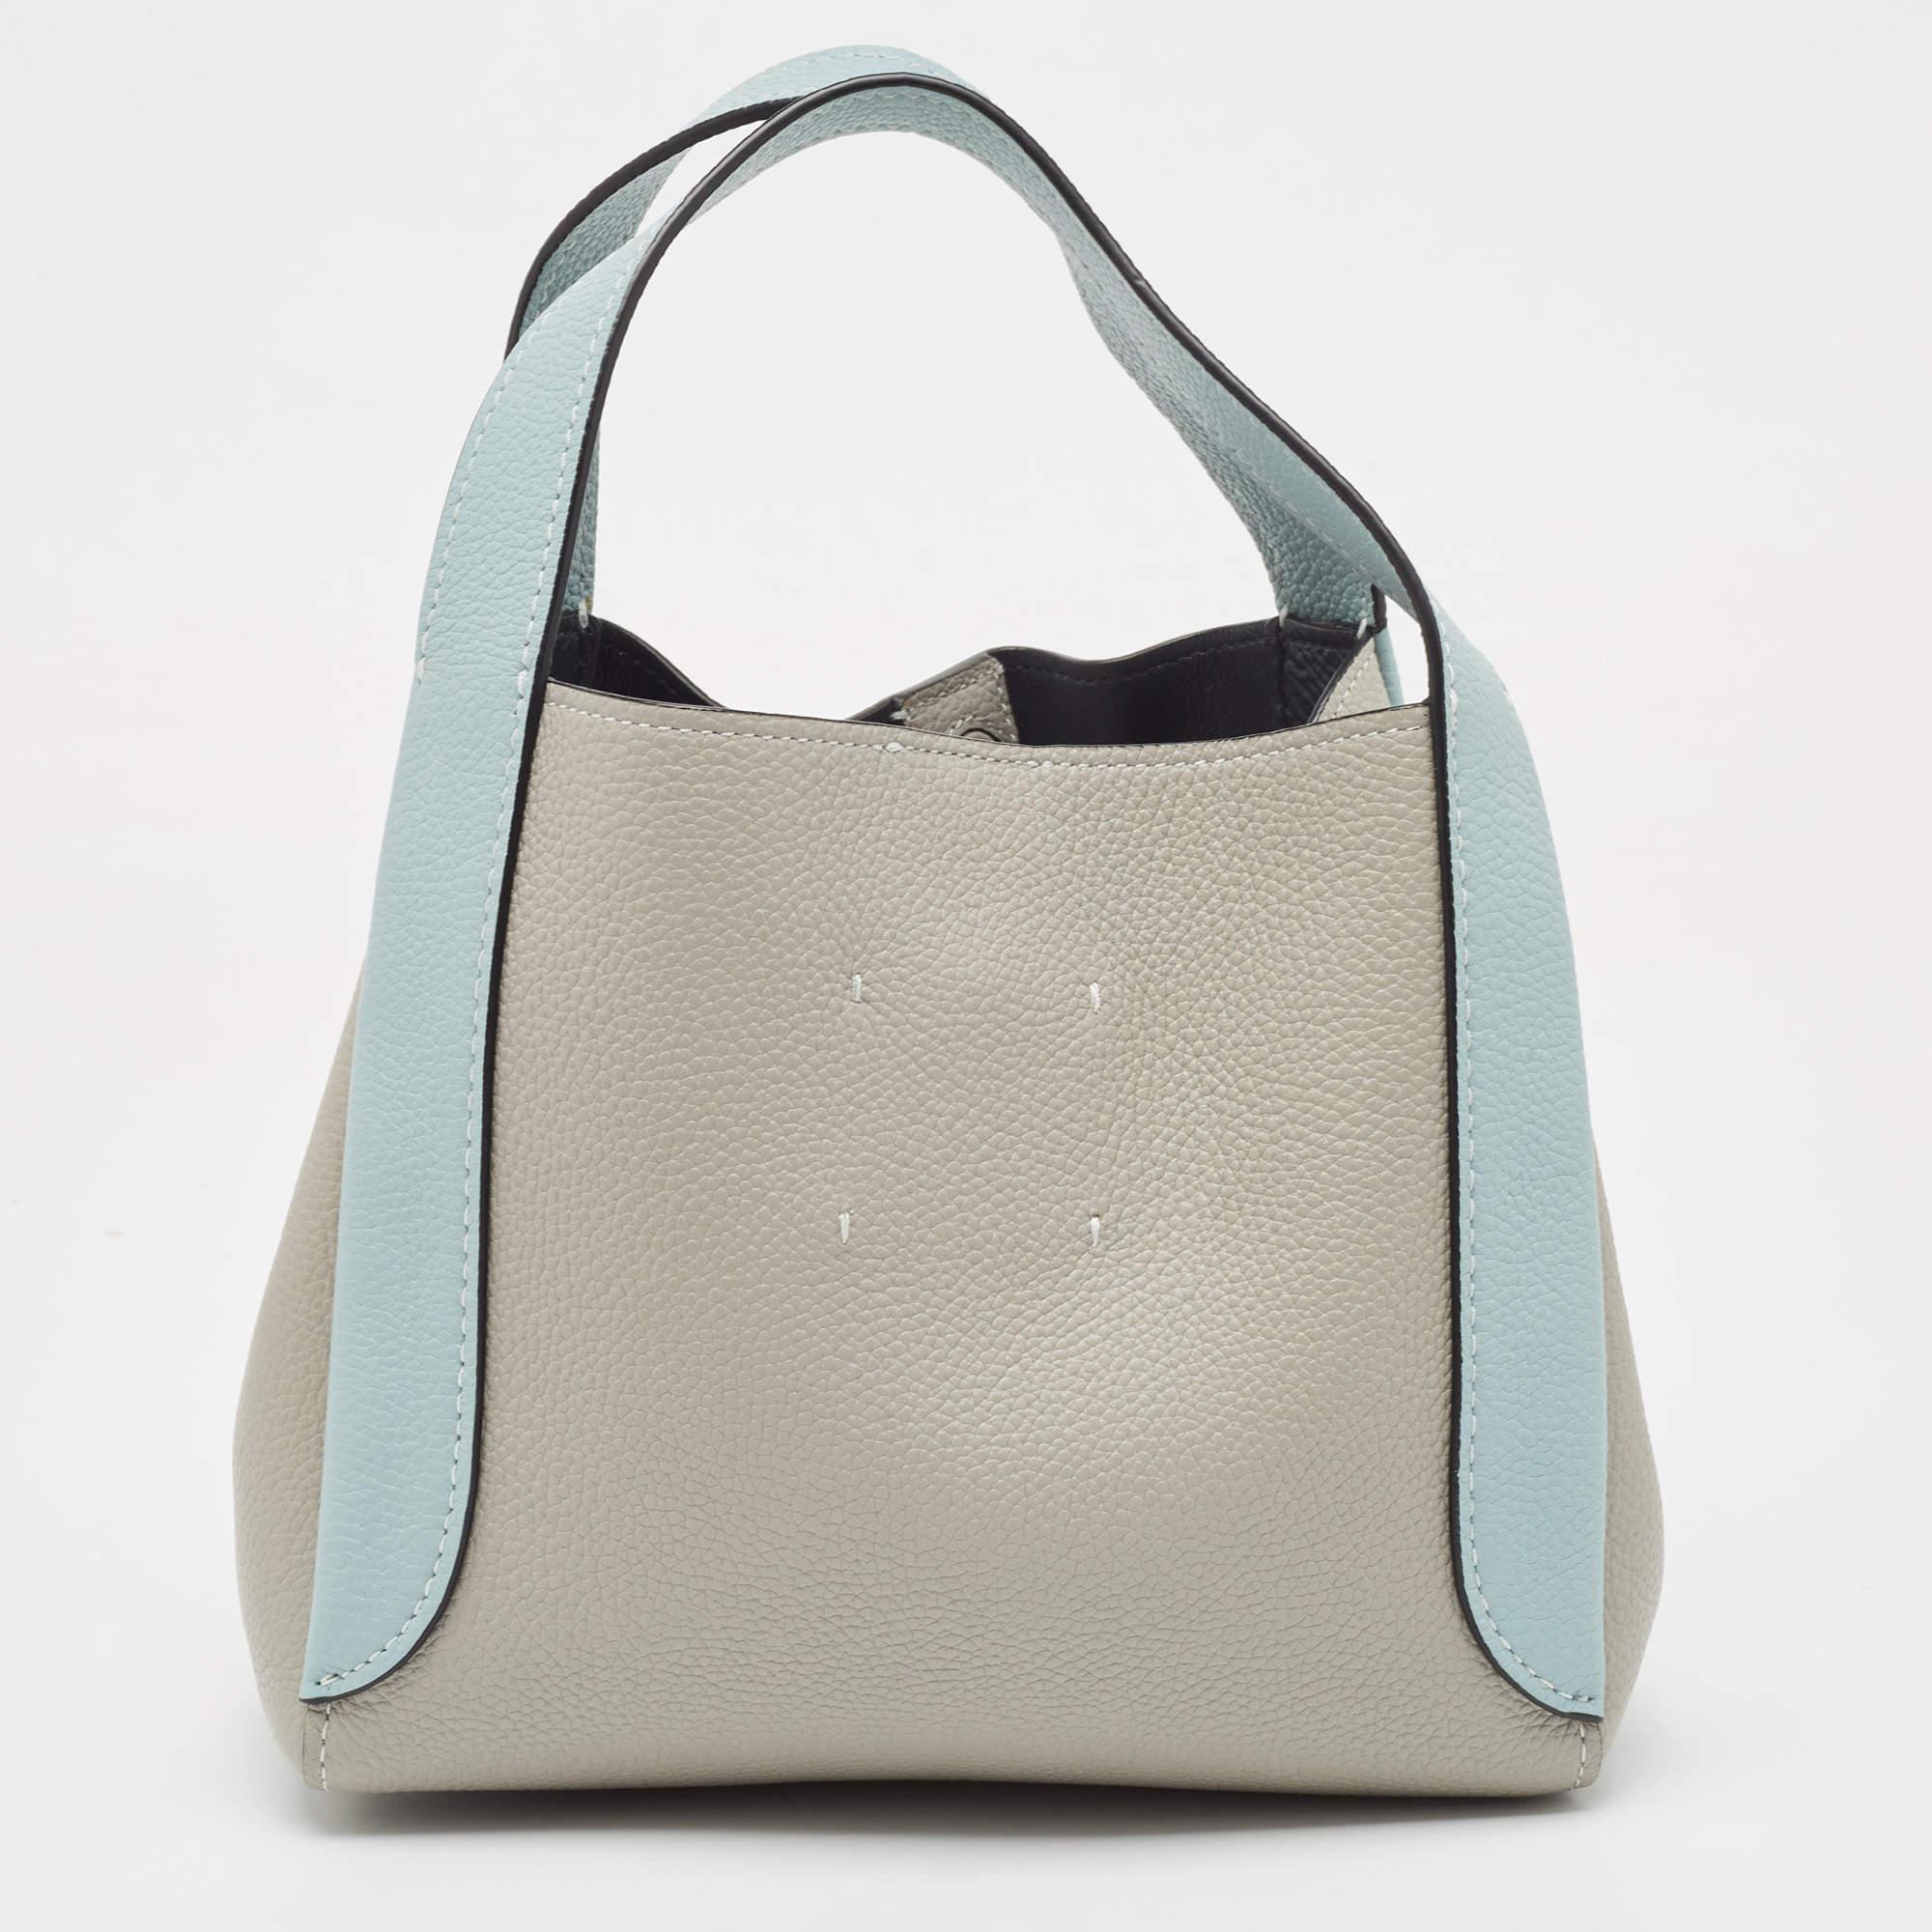 Stylish handbags never fail to make a fashionable impression. Make this designer hobo yours by pairing it with your sophisticated workwear as well as chic casual looks.

Includes: Original Dustbag, Brand Tag, Detachable Strap